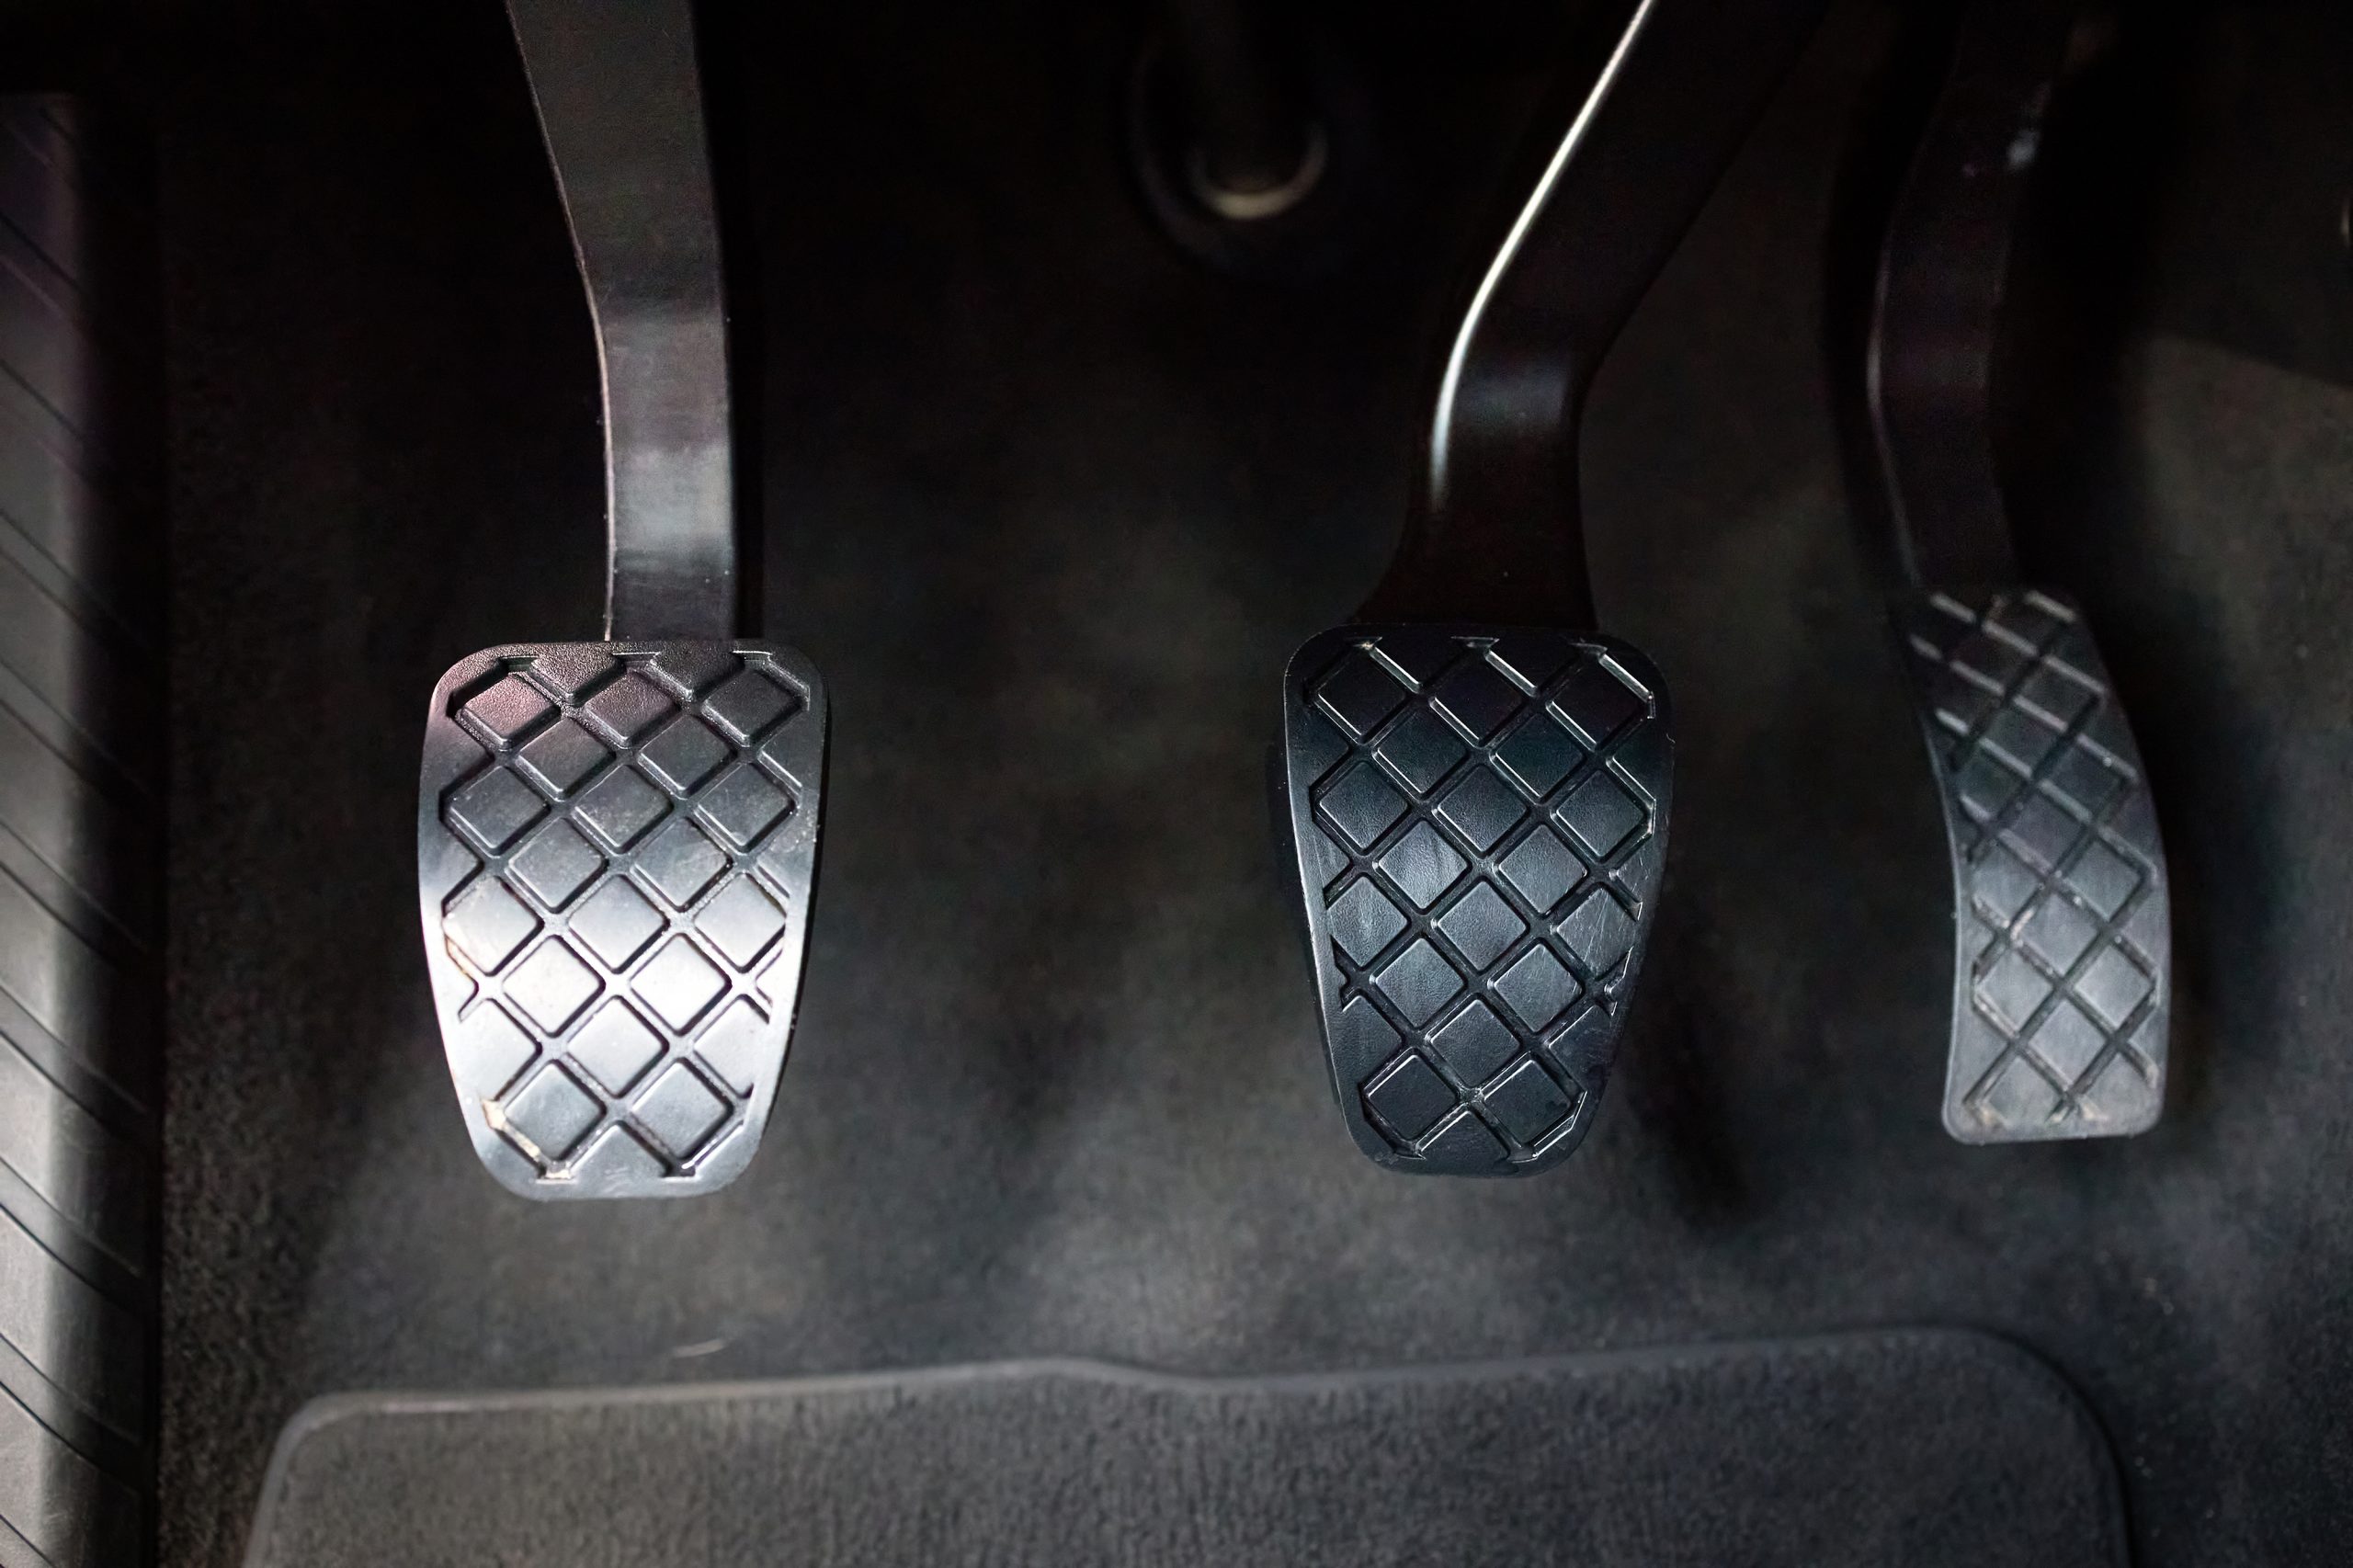 What is the on/off pedal for in most automatic transmission cars